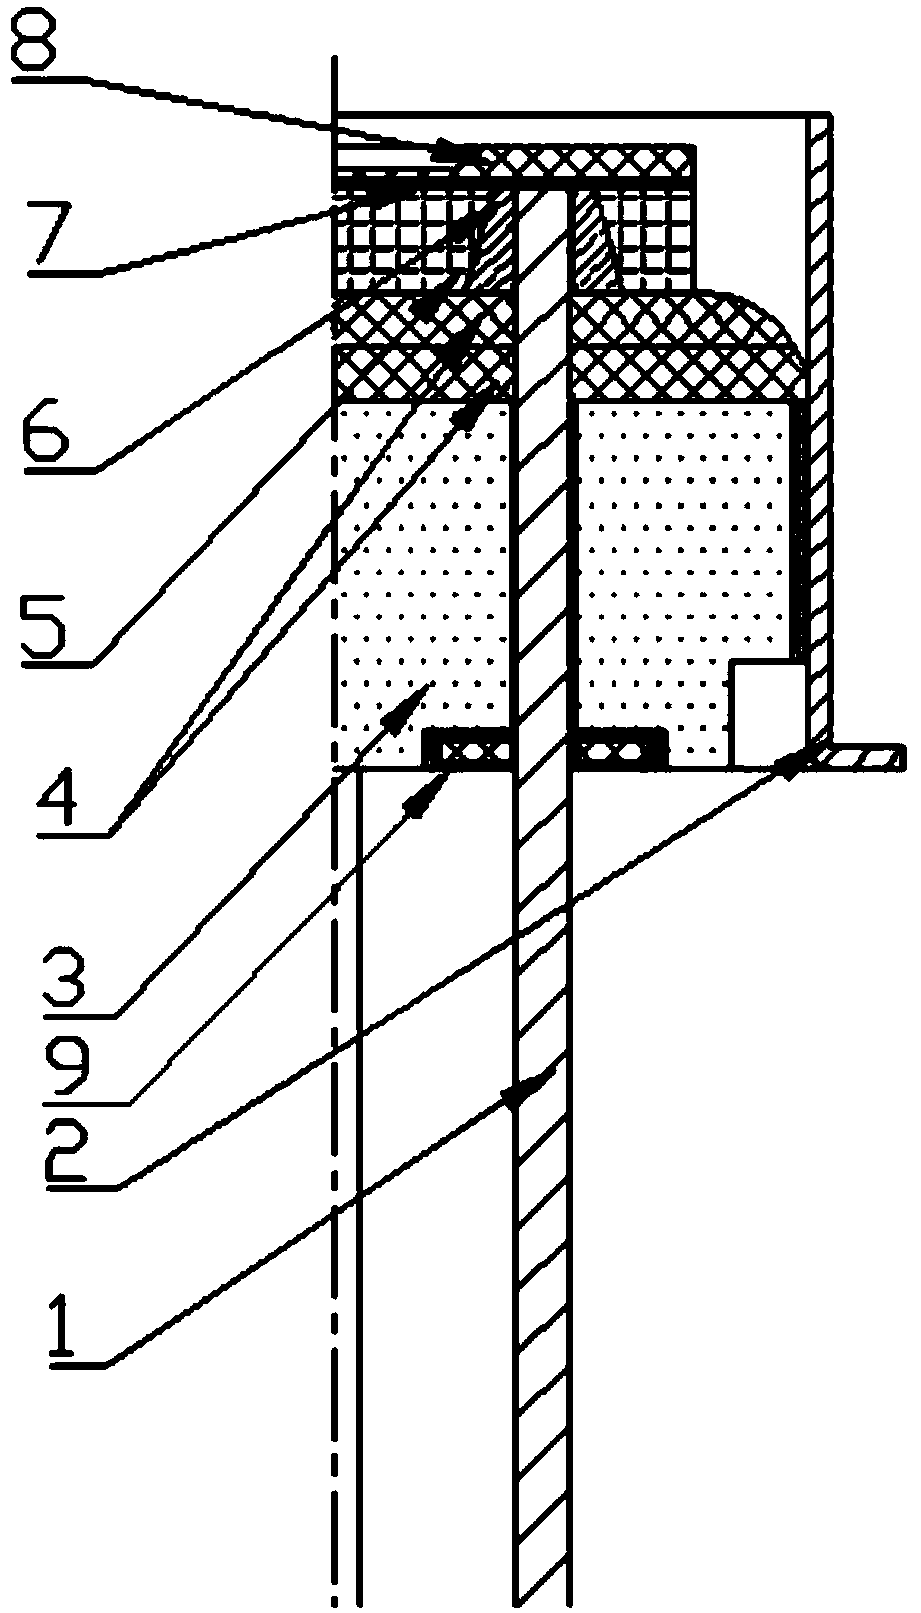 Pressure-sensitive device with axial sintering of ceramic metal tube shell adopted